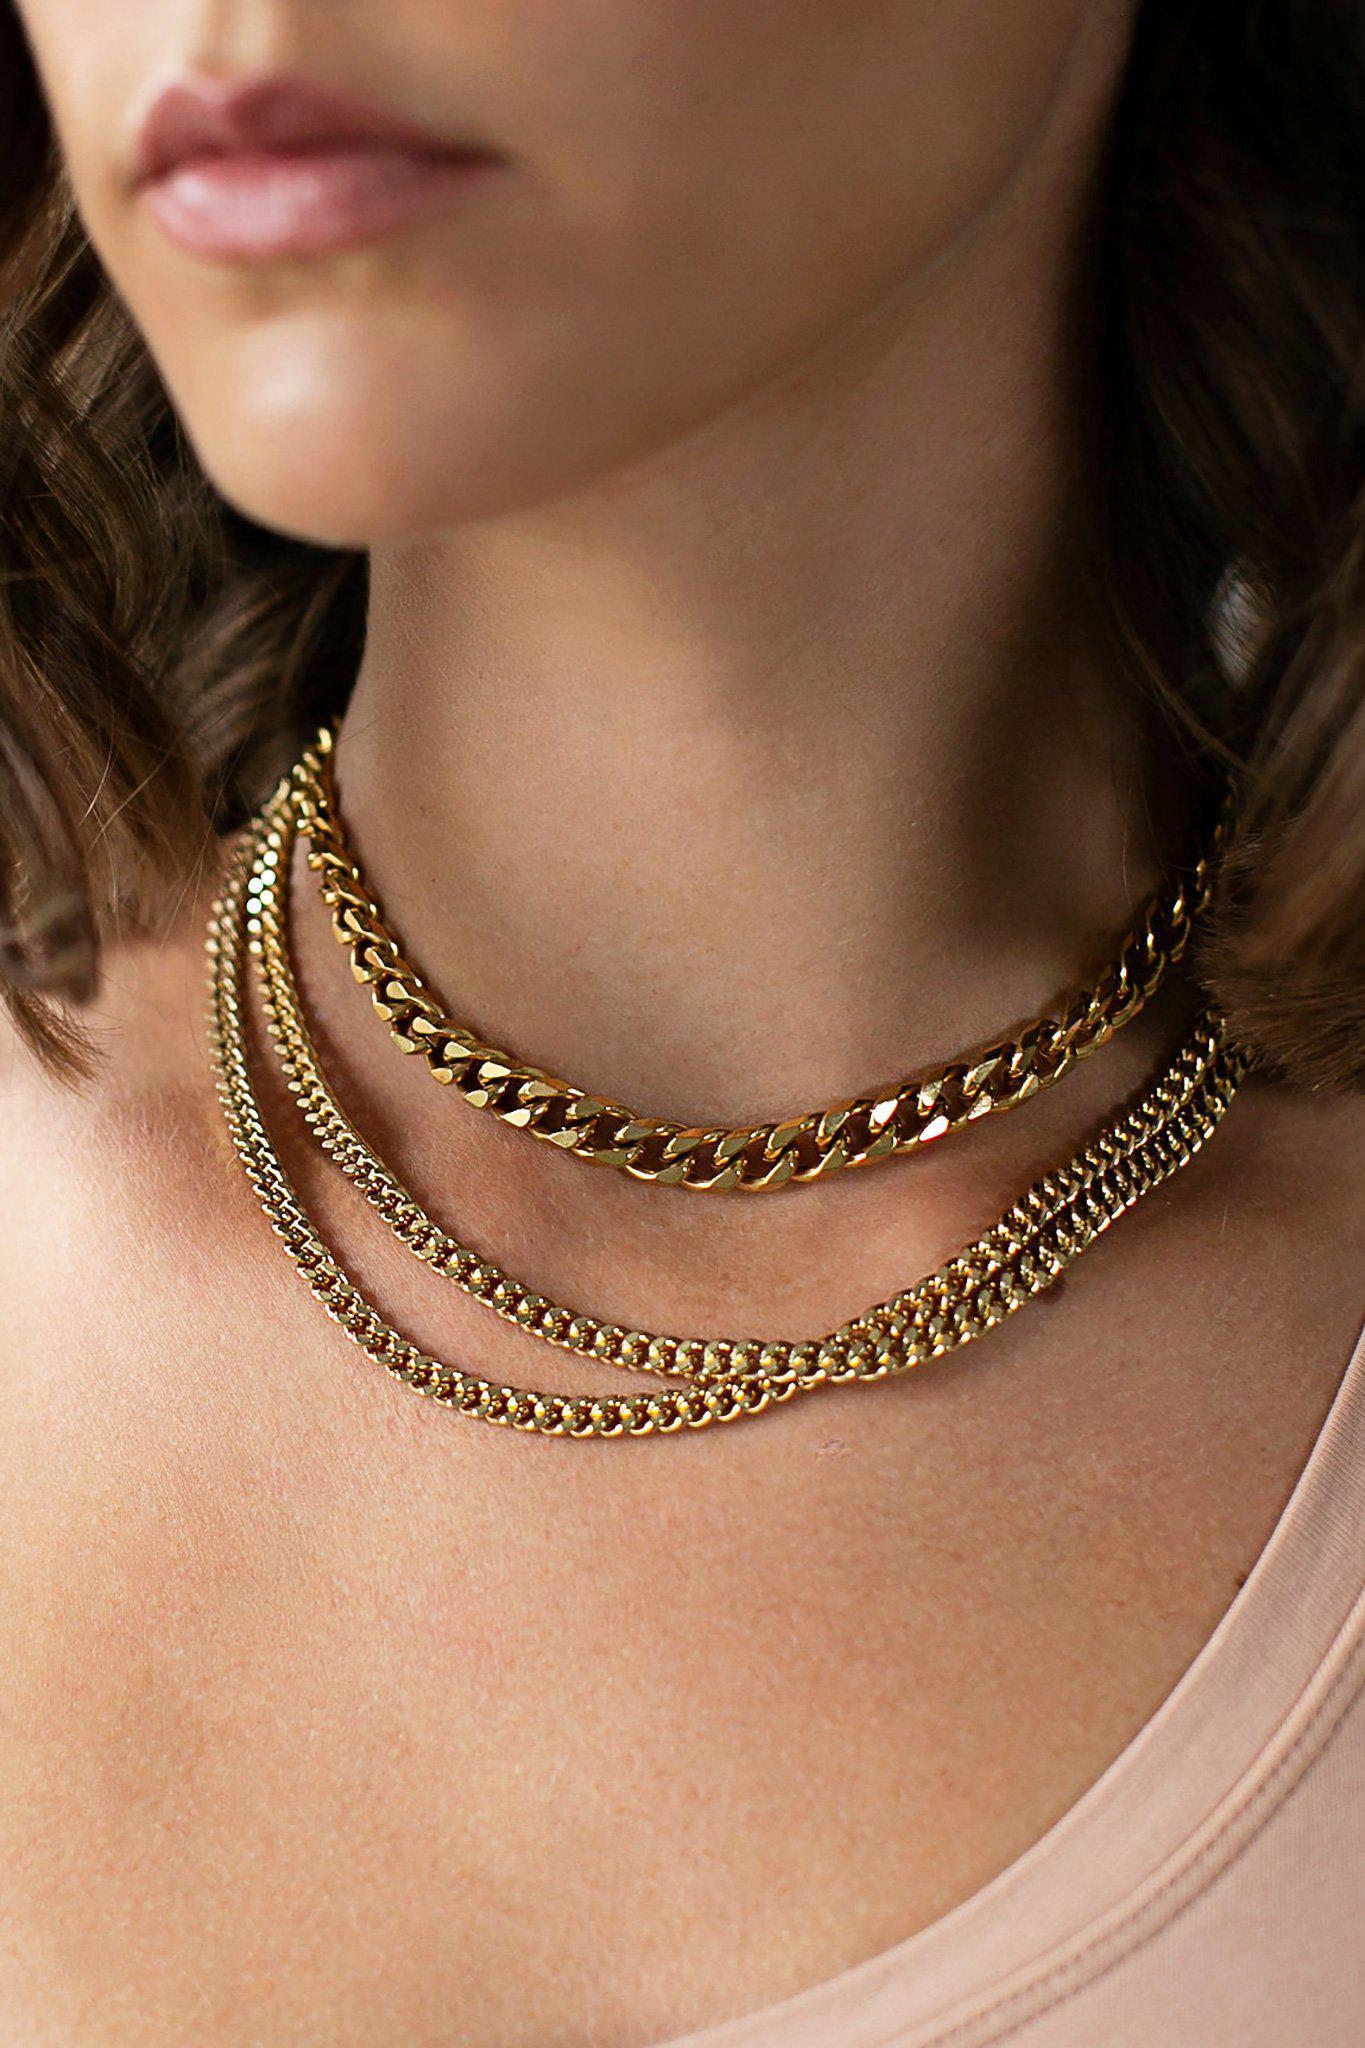 Giselle Thick Gold Chain Necklace with smaller chains on model